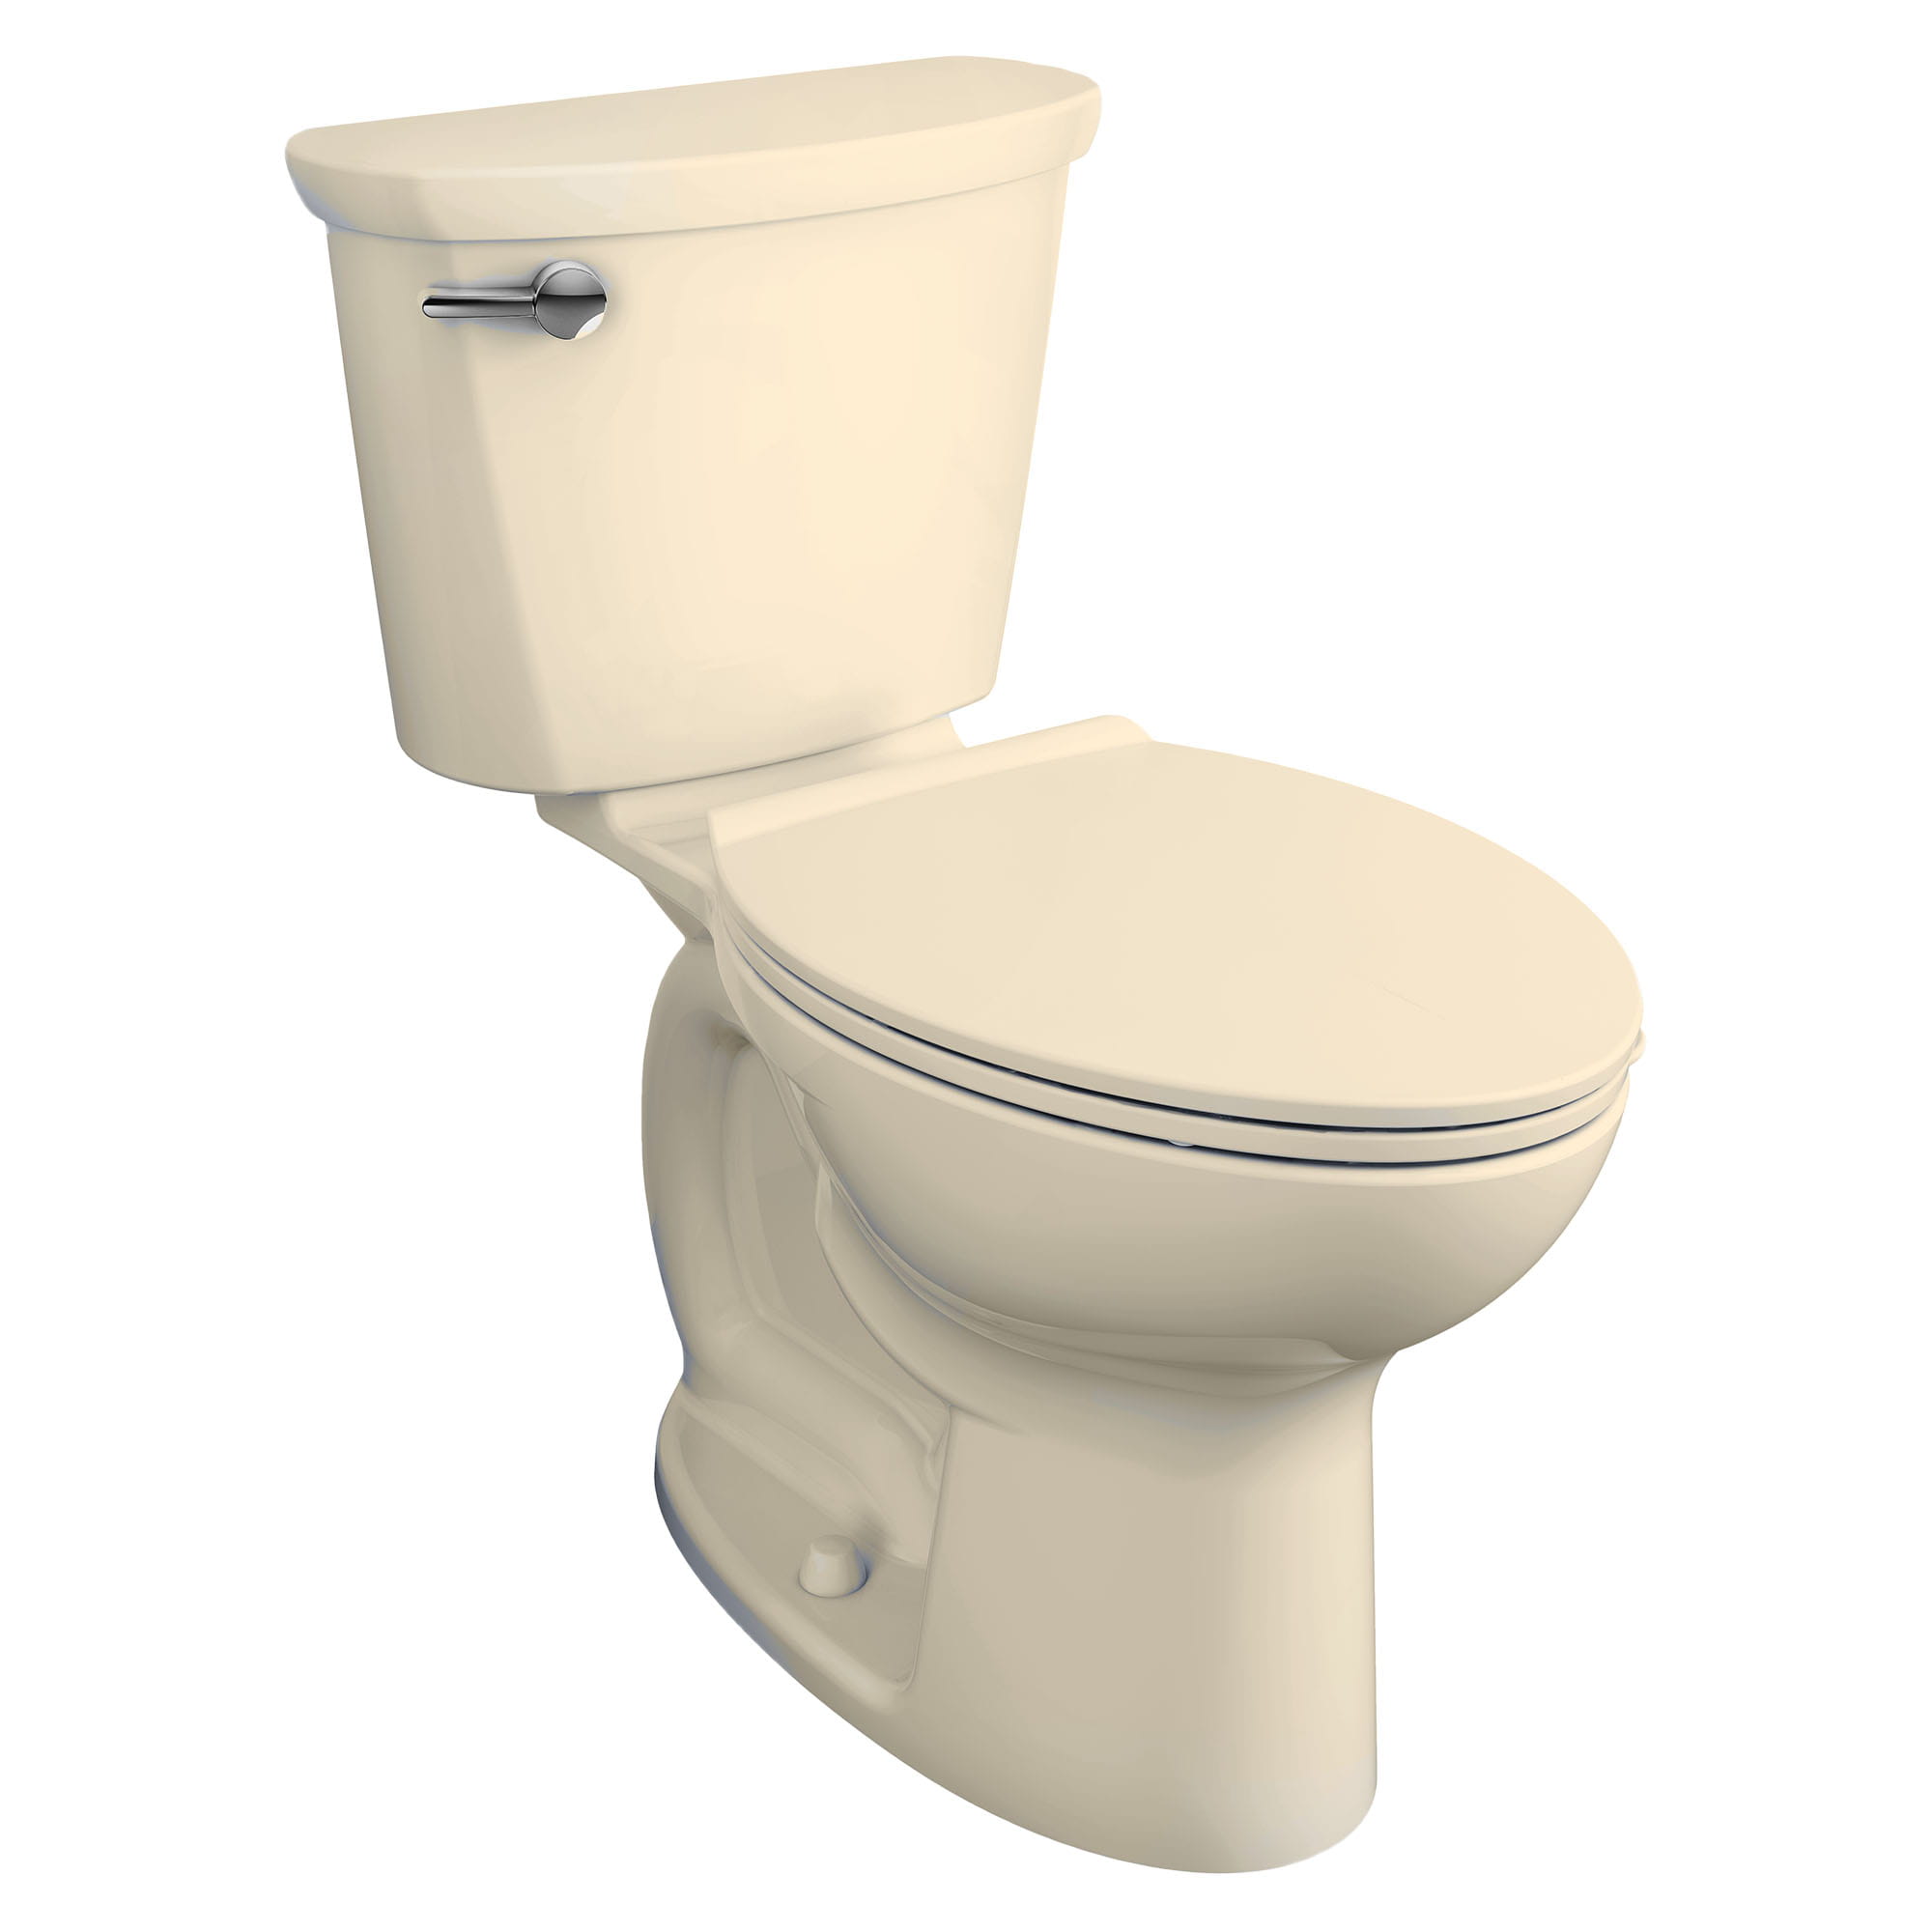 Cadet® PRO Two-Piece 1.6 gpf/6.0 Lpf Compact Chair Height Elongated Toilet Less Seat